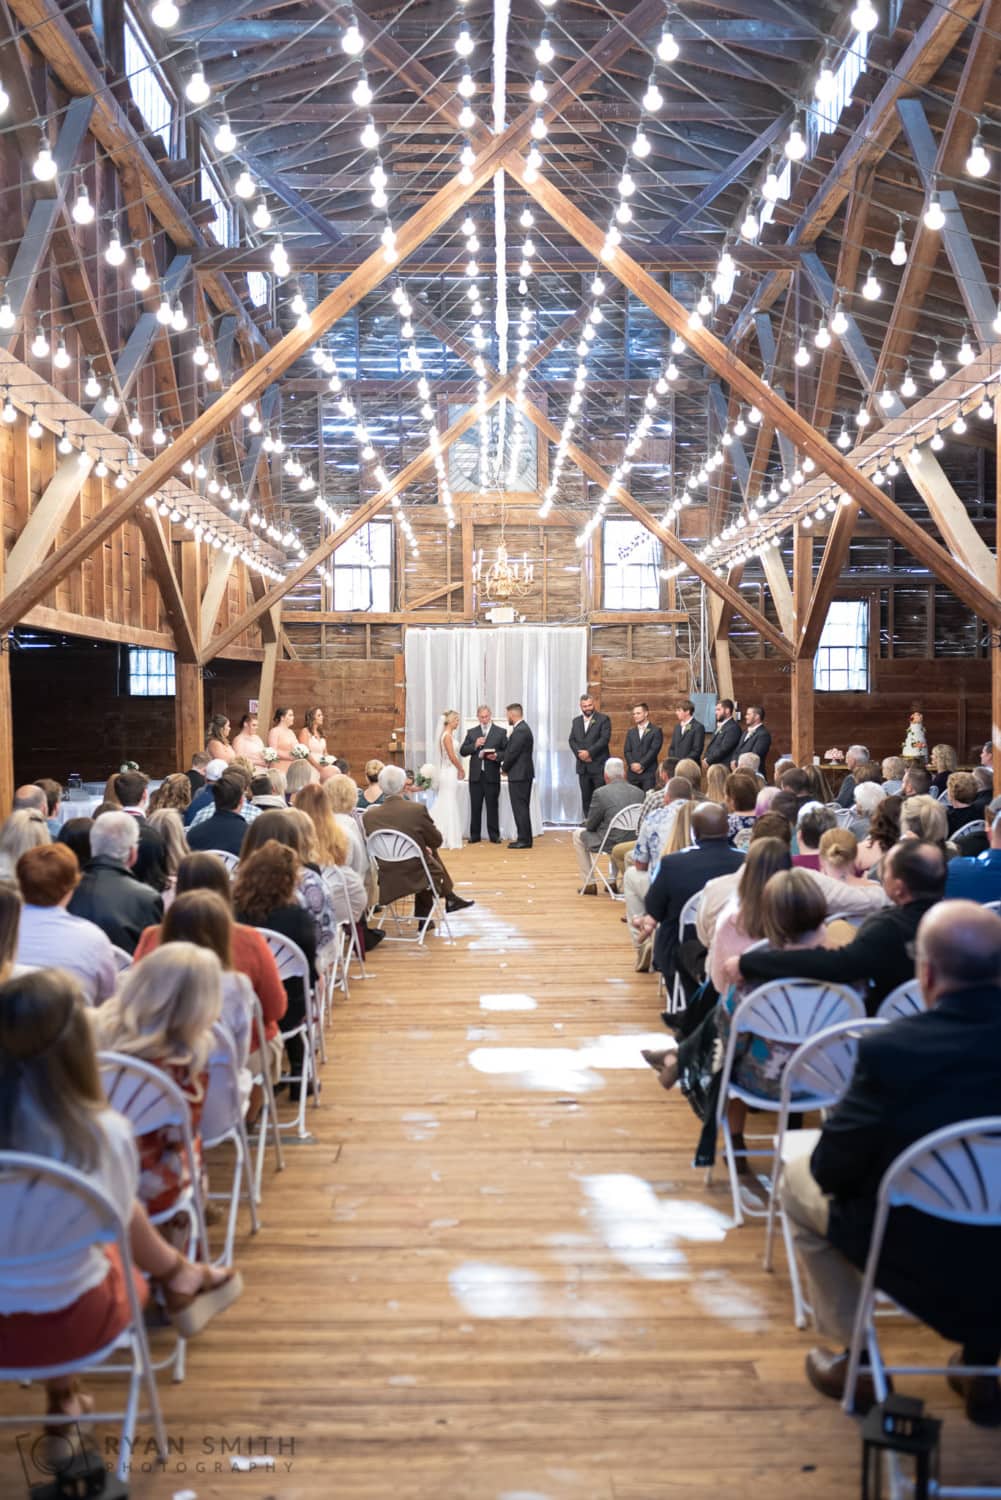 Ceremony under the lights - Peanut Warehouse - Conway